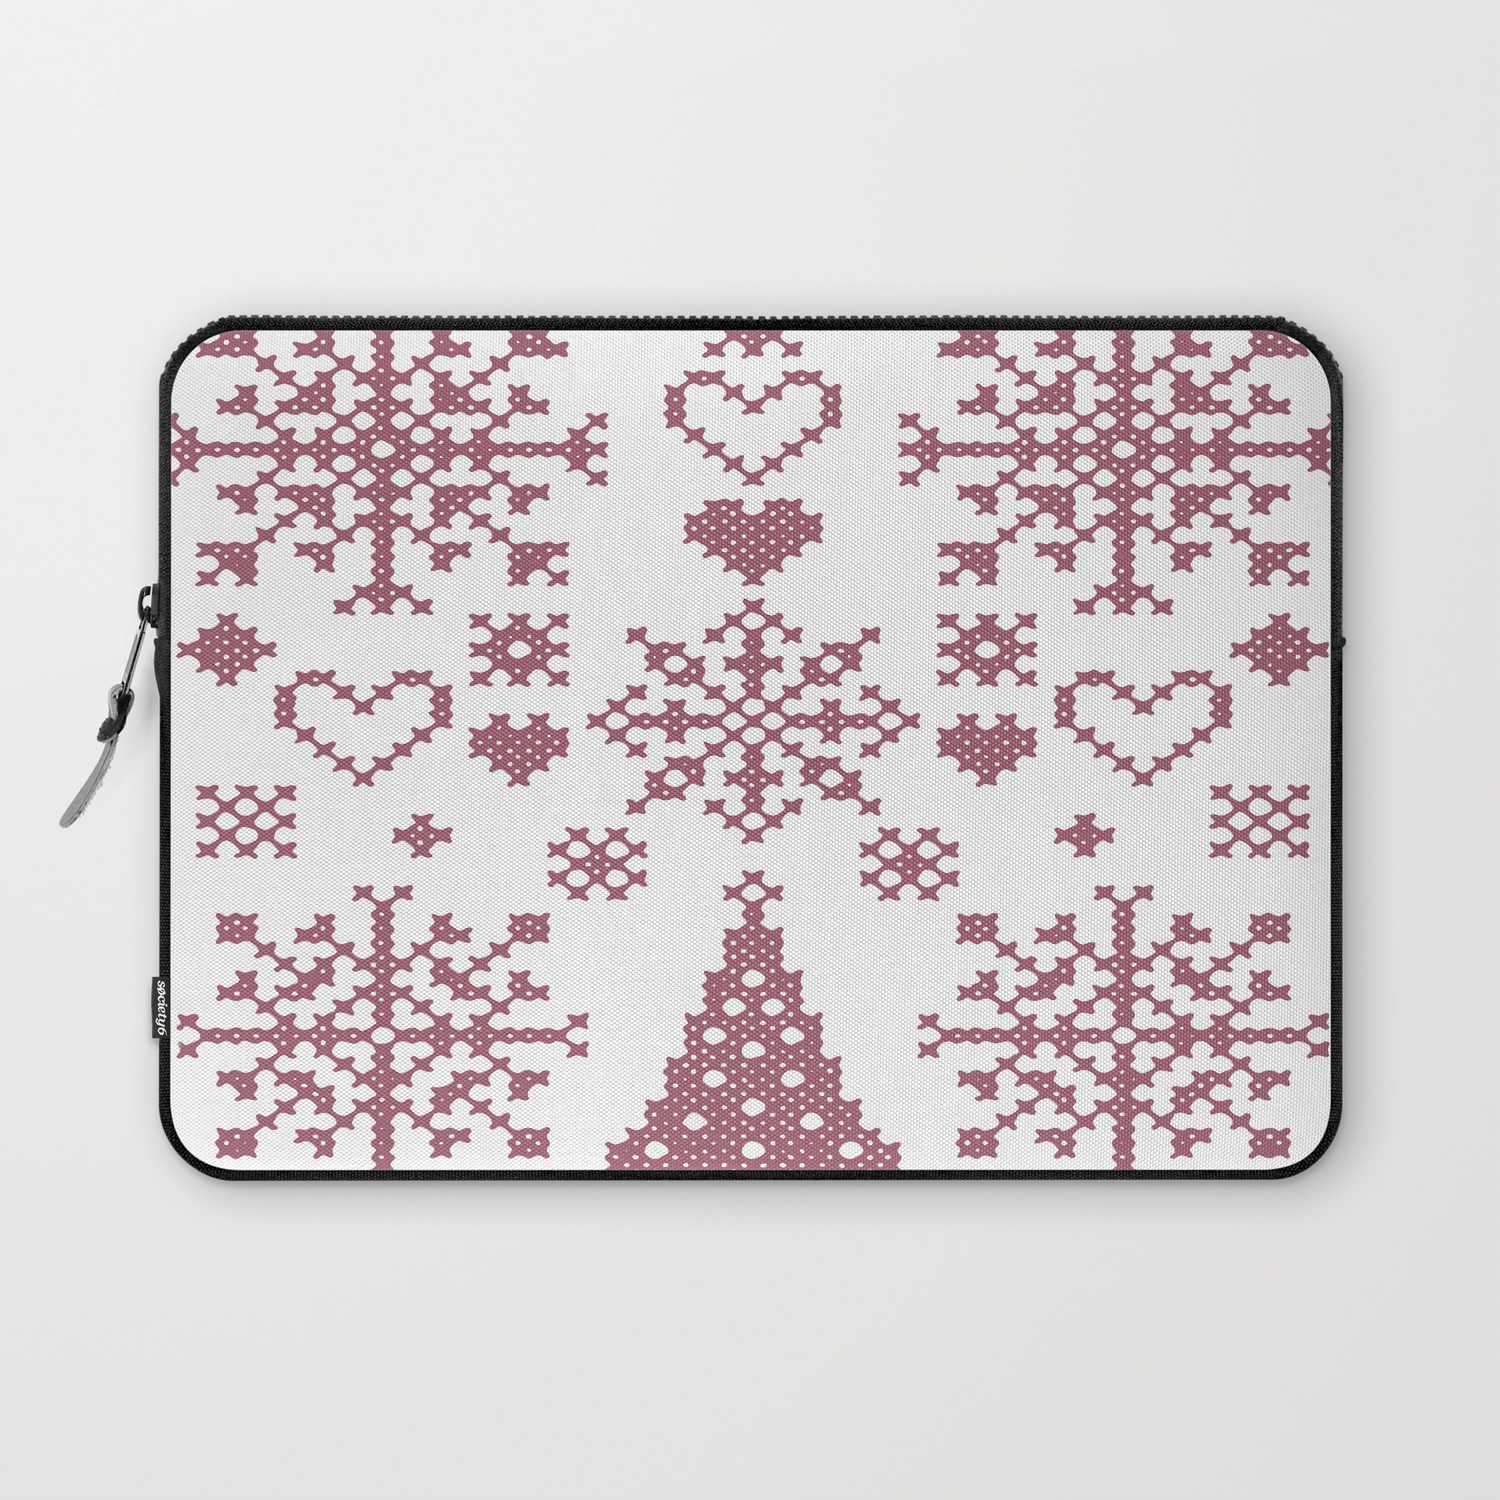 Embroidery Sampler Patterns Christmas Cross Stitch Embroidery Sampler Pink And White Laptop Sleeve